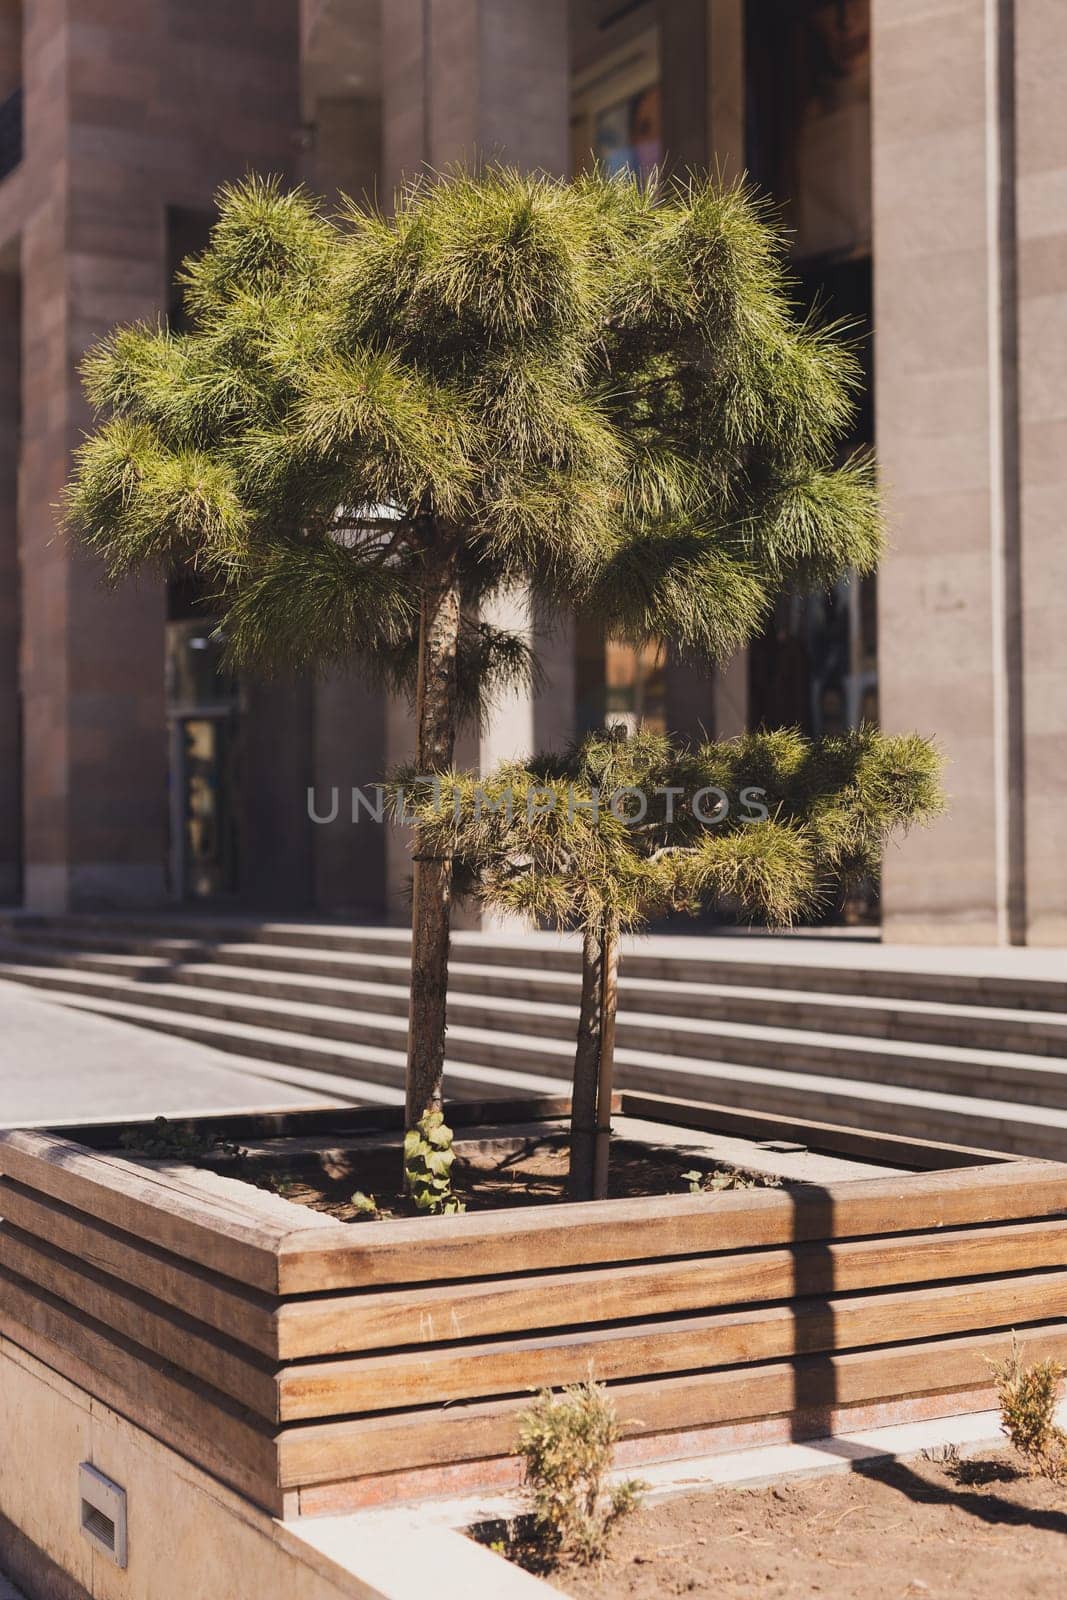 Wooden flower bed with pine tree. Originally floristic decorated street or alley in city centre